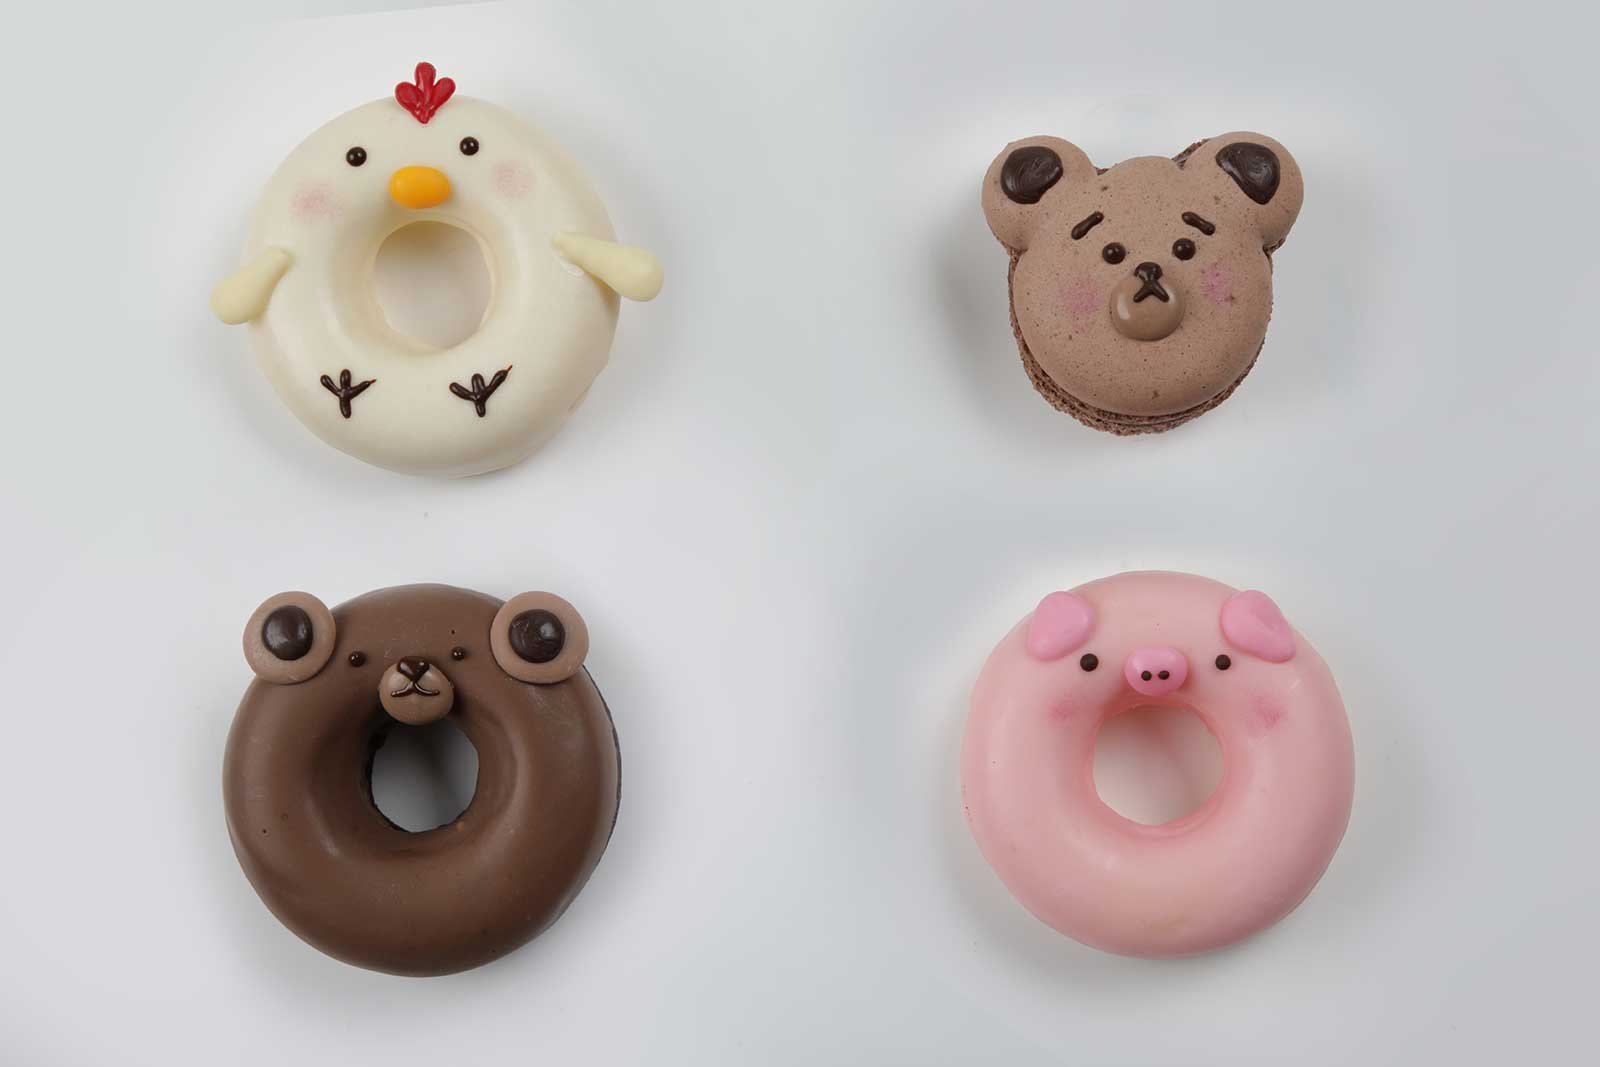 Adorable pastries, the easy way